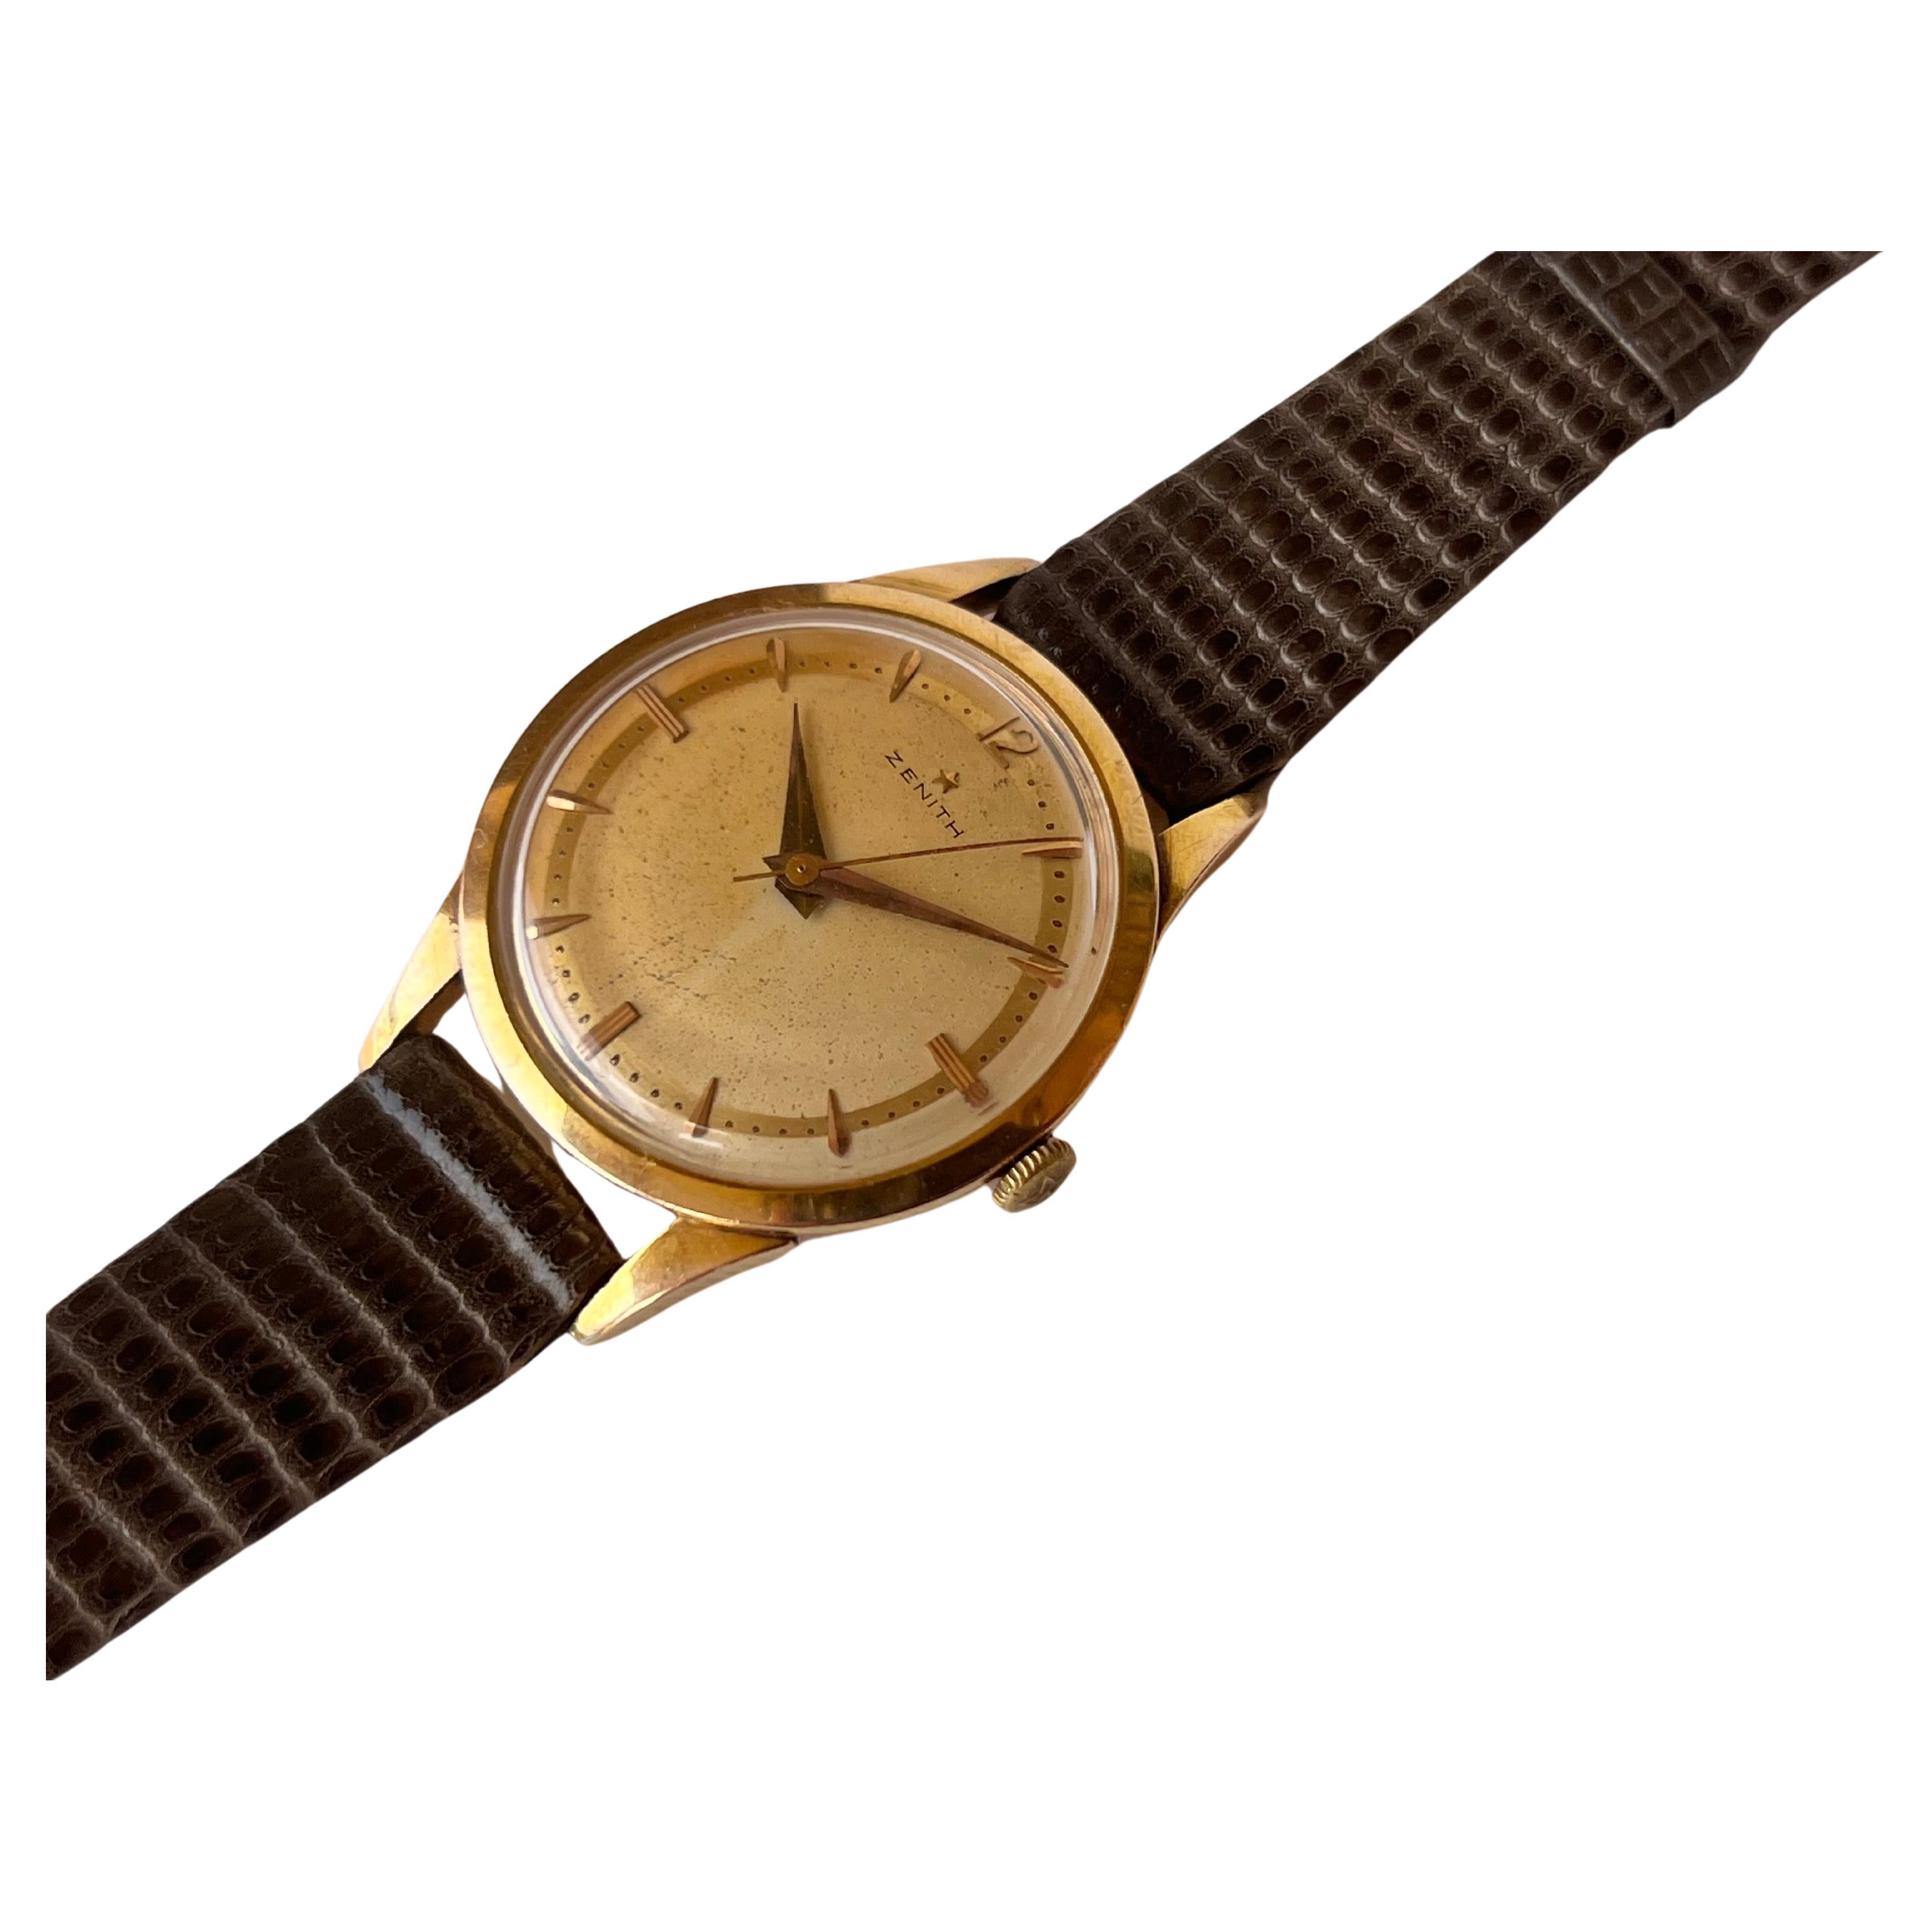 Brand : Zenith Star

Model: Zenith Star Mechnical Bumper Cal 120 cas Men's Watch 36mm

Reference Number : 9219136

Features : 18Jewels - Gold Filled 80 Mic

Country Of Manufacture: Switzerland

Movement: Hand Wind

Case Material: 80 Mic Hand